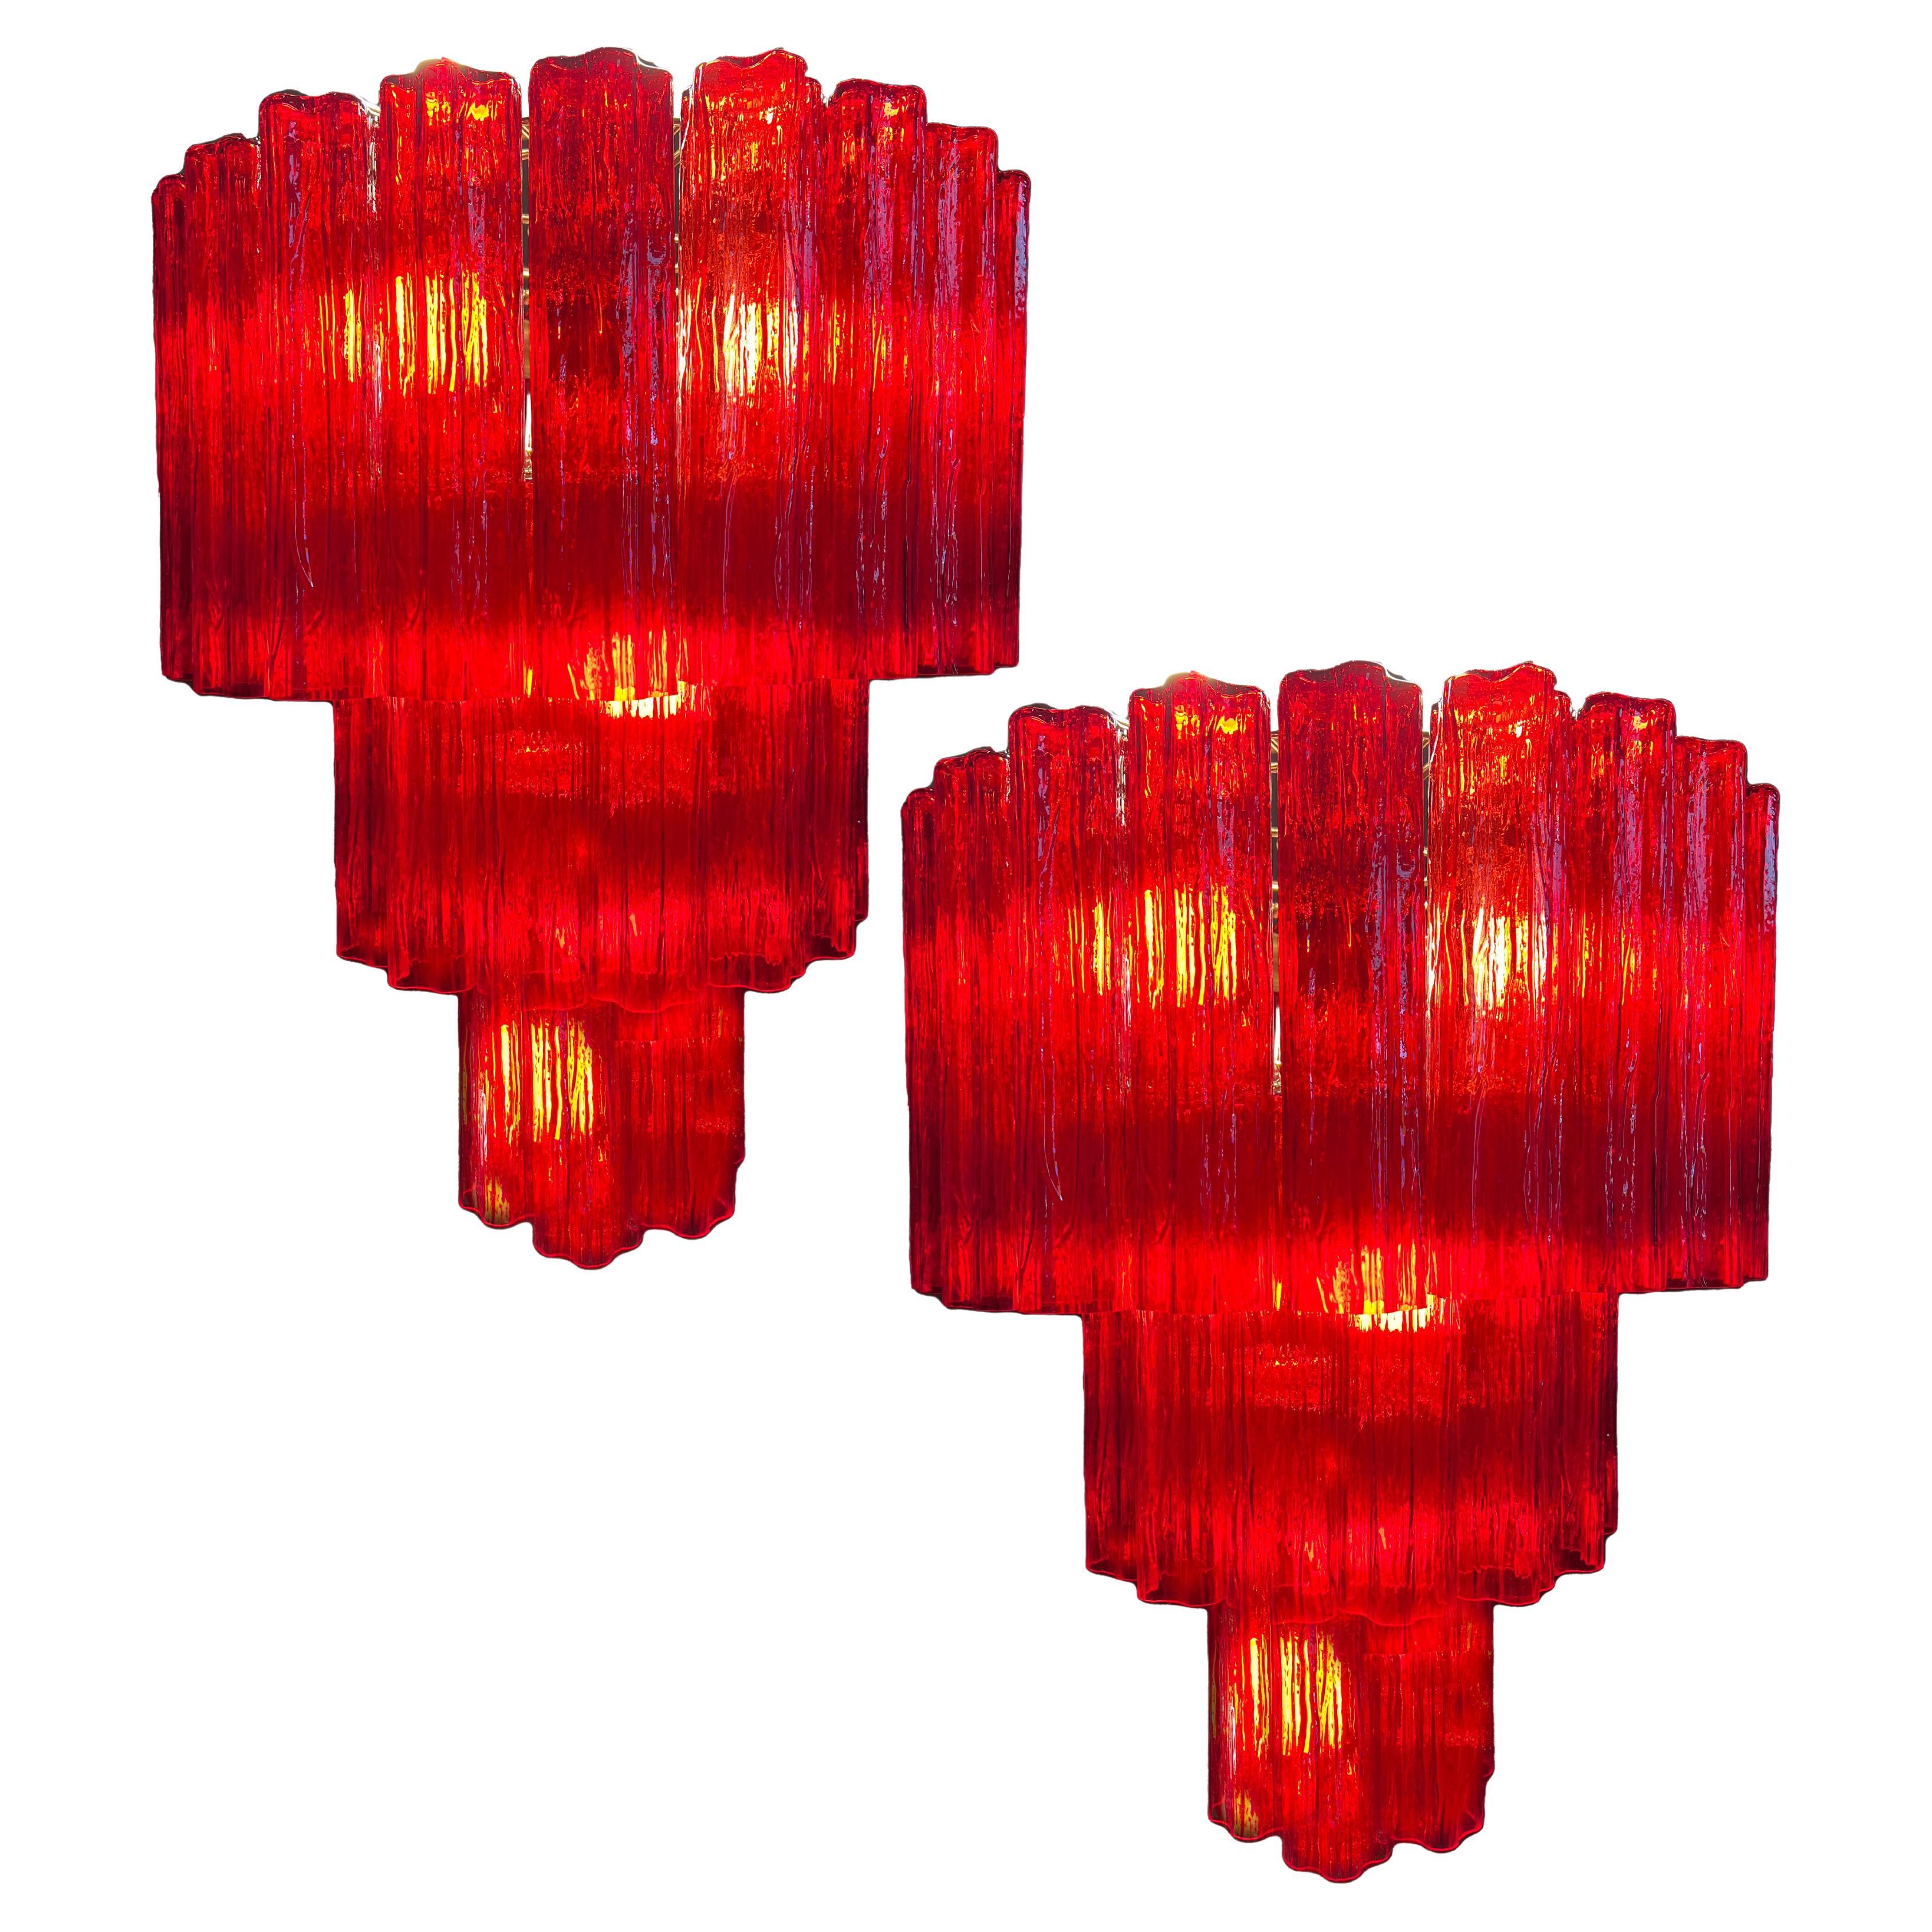 Elegant Murano chandelier. The ruby red is flamboyant and bewitching. The height without chain is 112 cm.